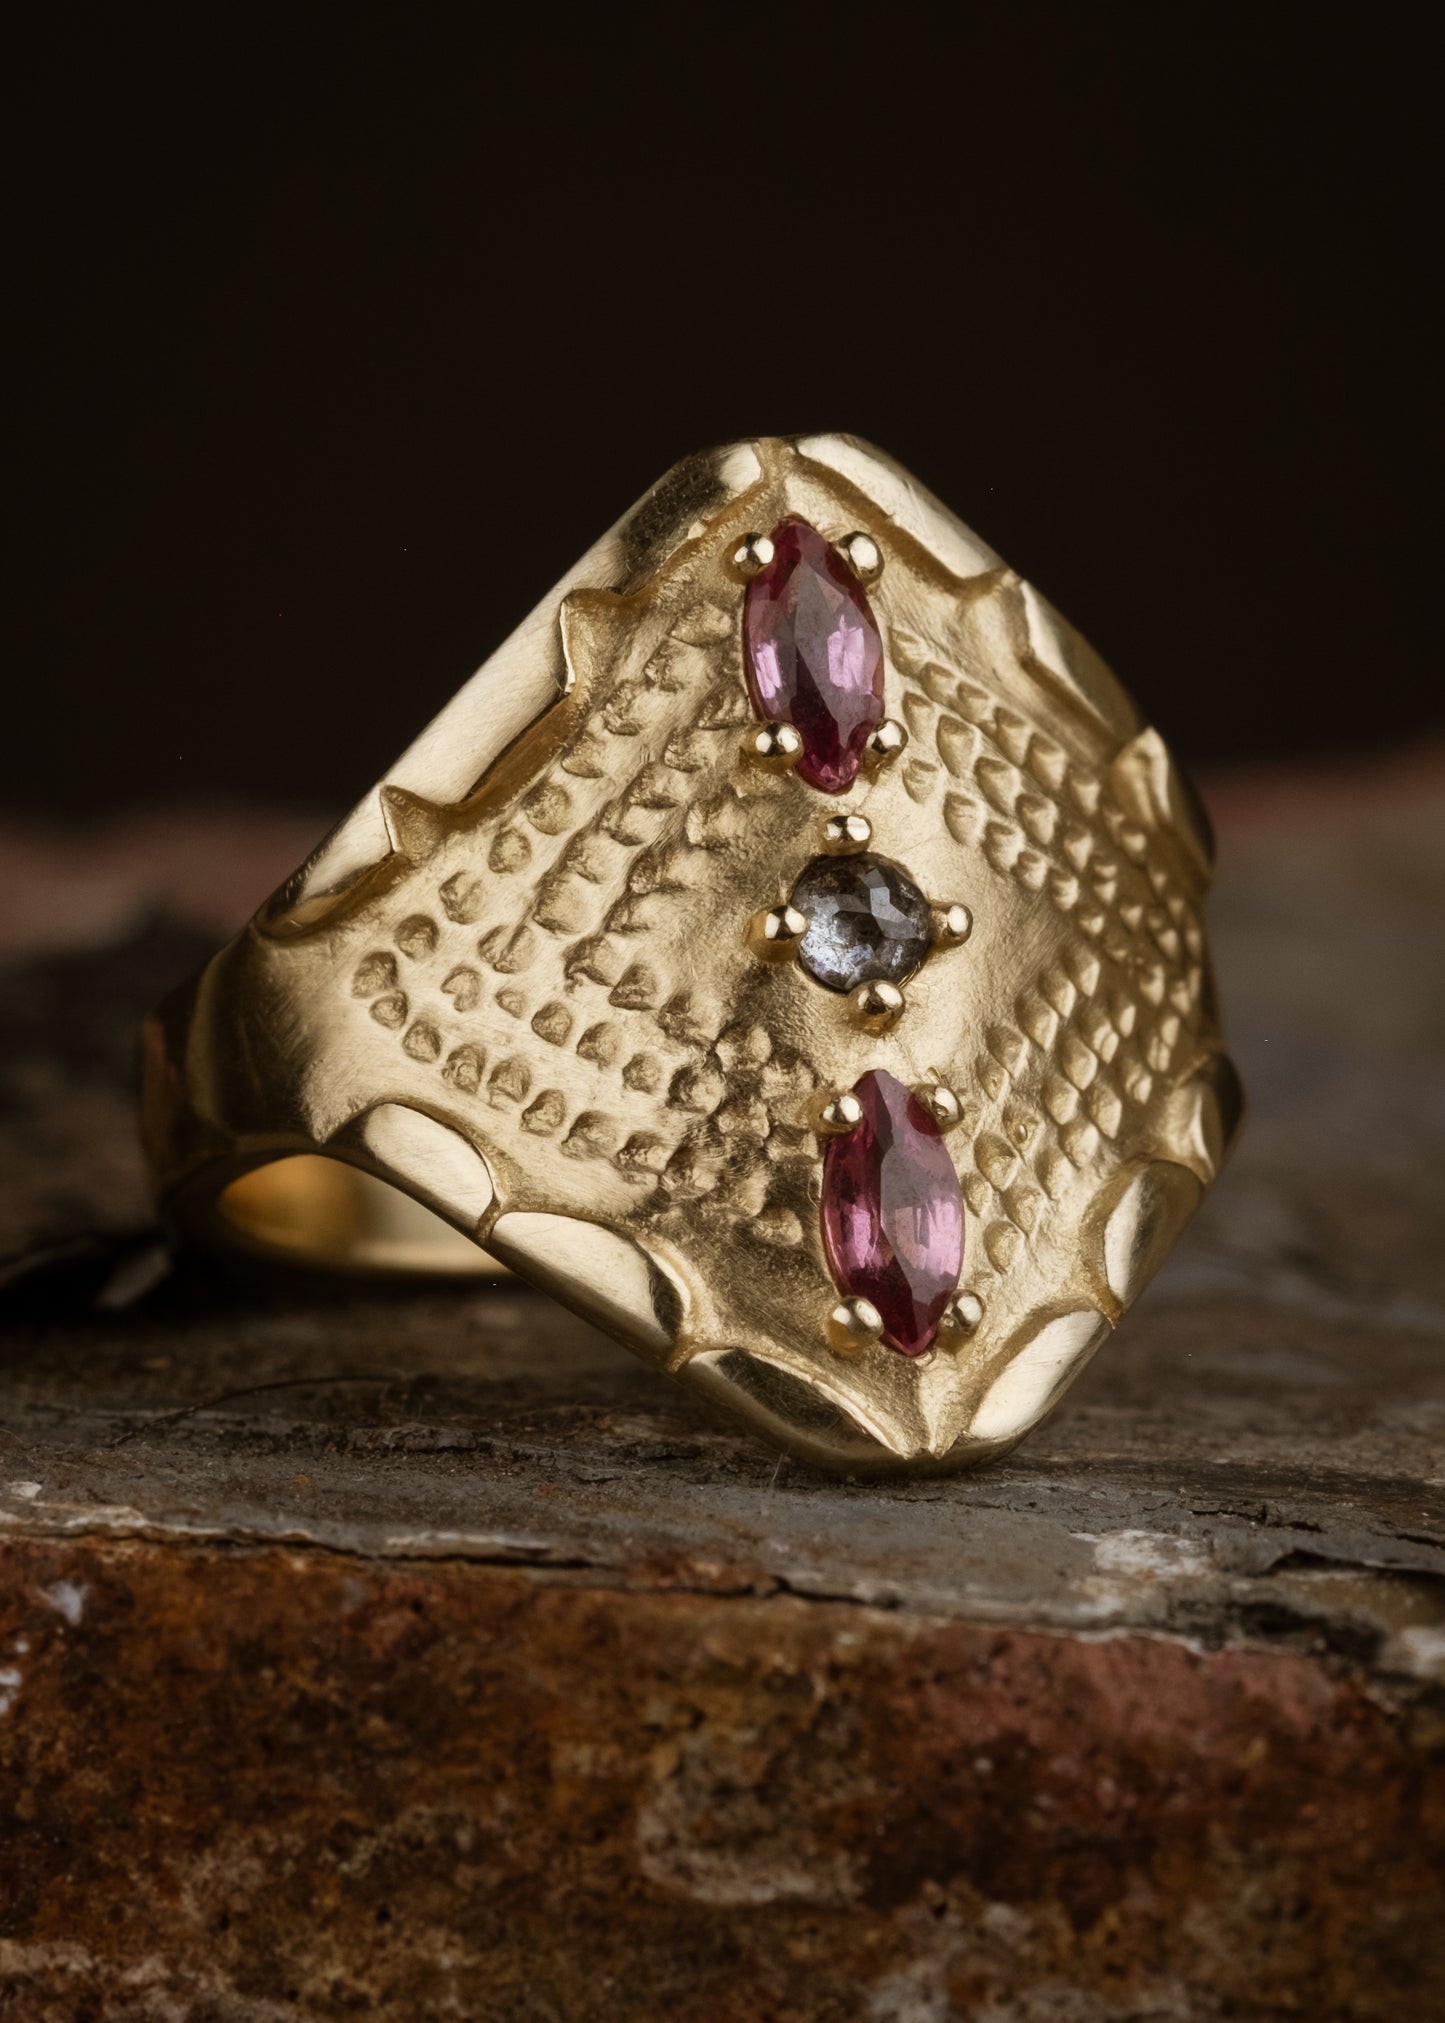 Inspired by the pointed arches in ancient cathedrals, the Radial ring marries the strength of this architectural element with the softness of the hand-carved scalloped detail along the edges. Tourmalines and a rose cut diamond align in the center of this statement ring, radiating their light along an intricate textured pattern that highlights the beauty of the gold.